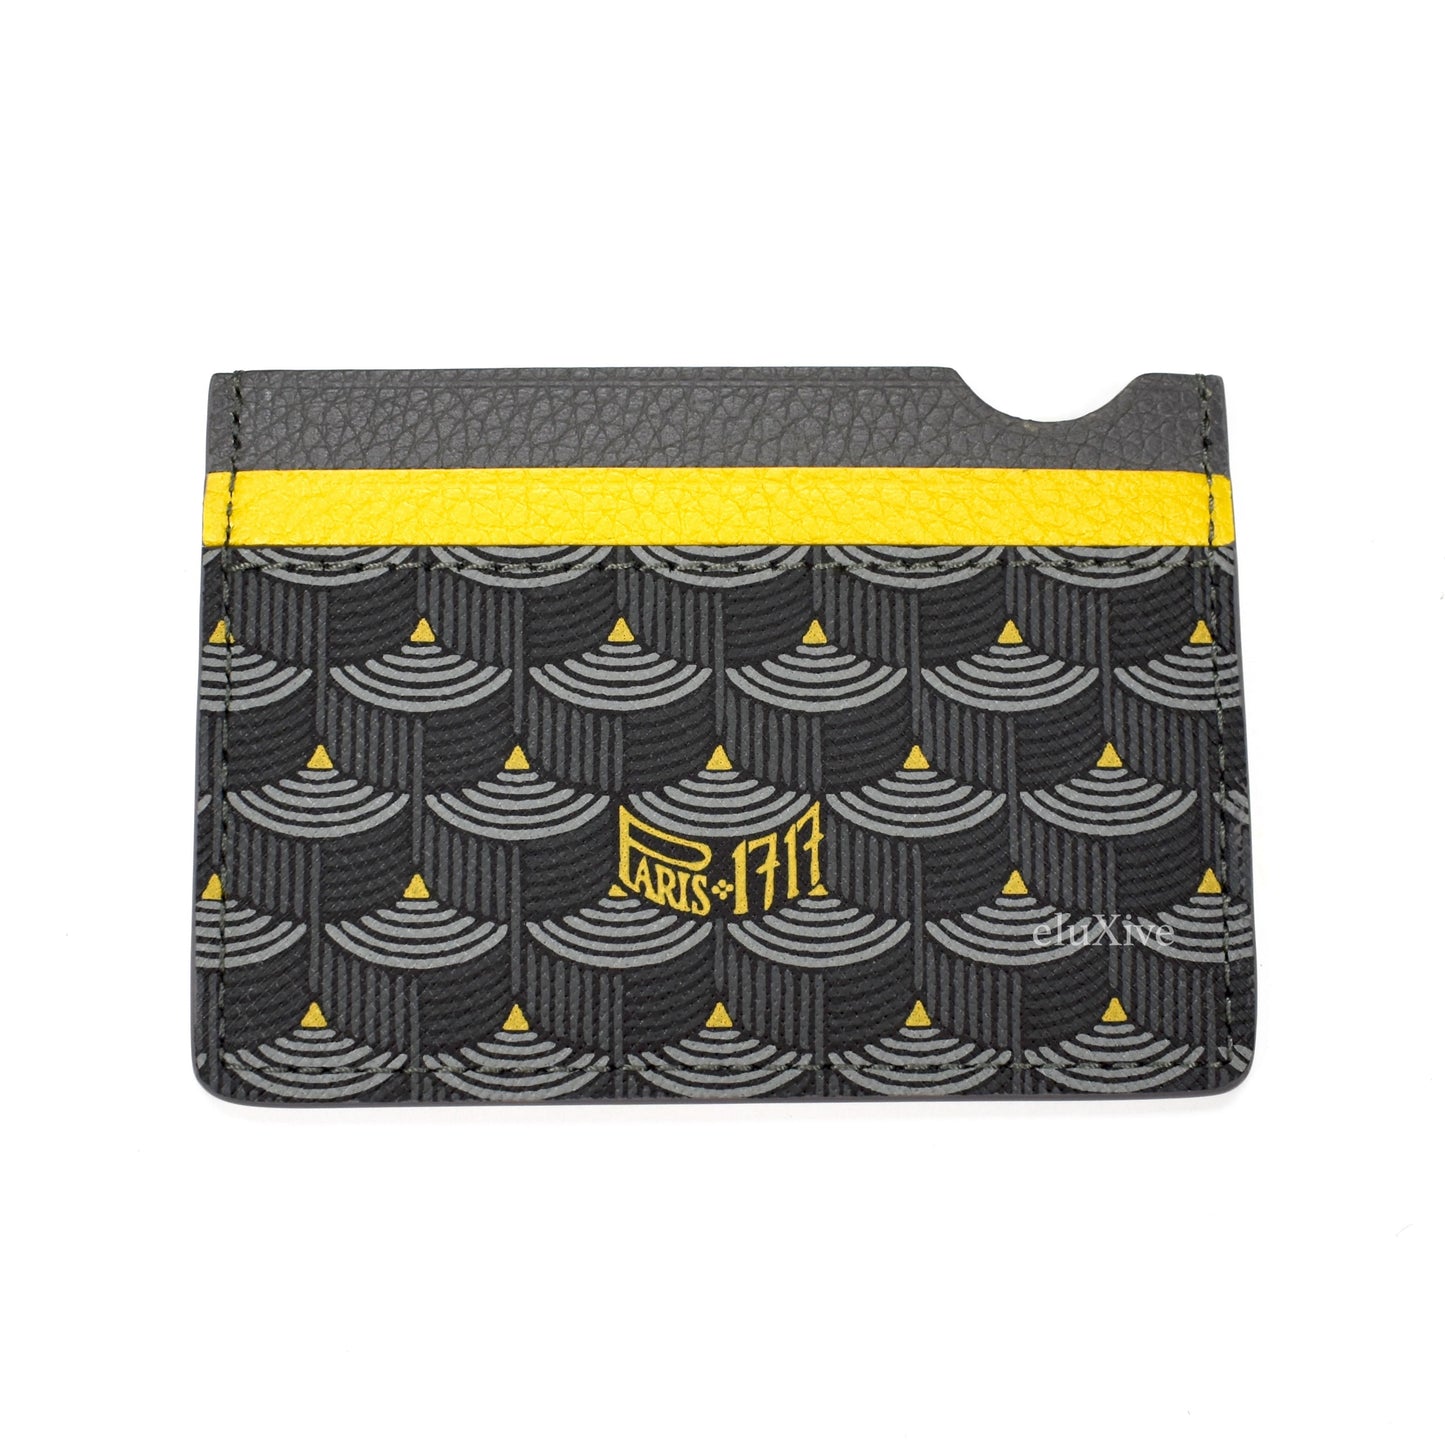 Faure Le Page - Steel Gray / Yellow 4CC Card Holder (2019)